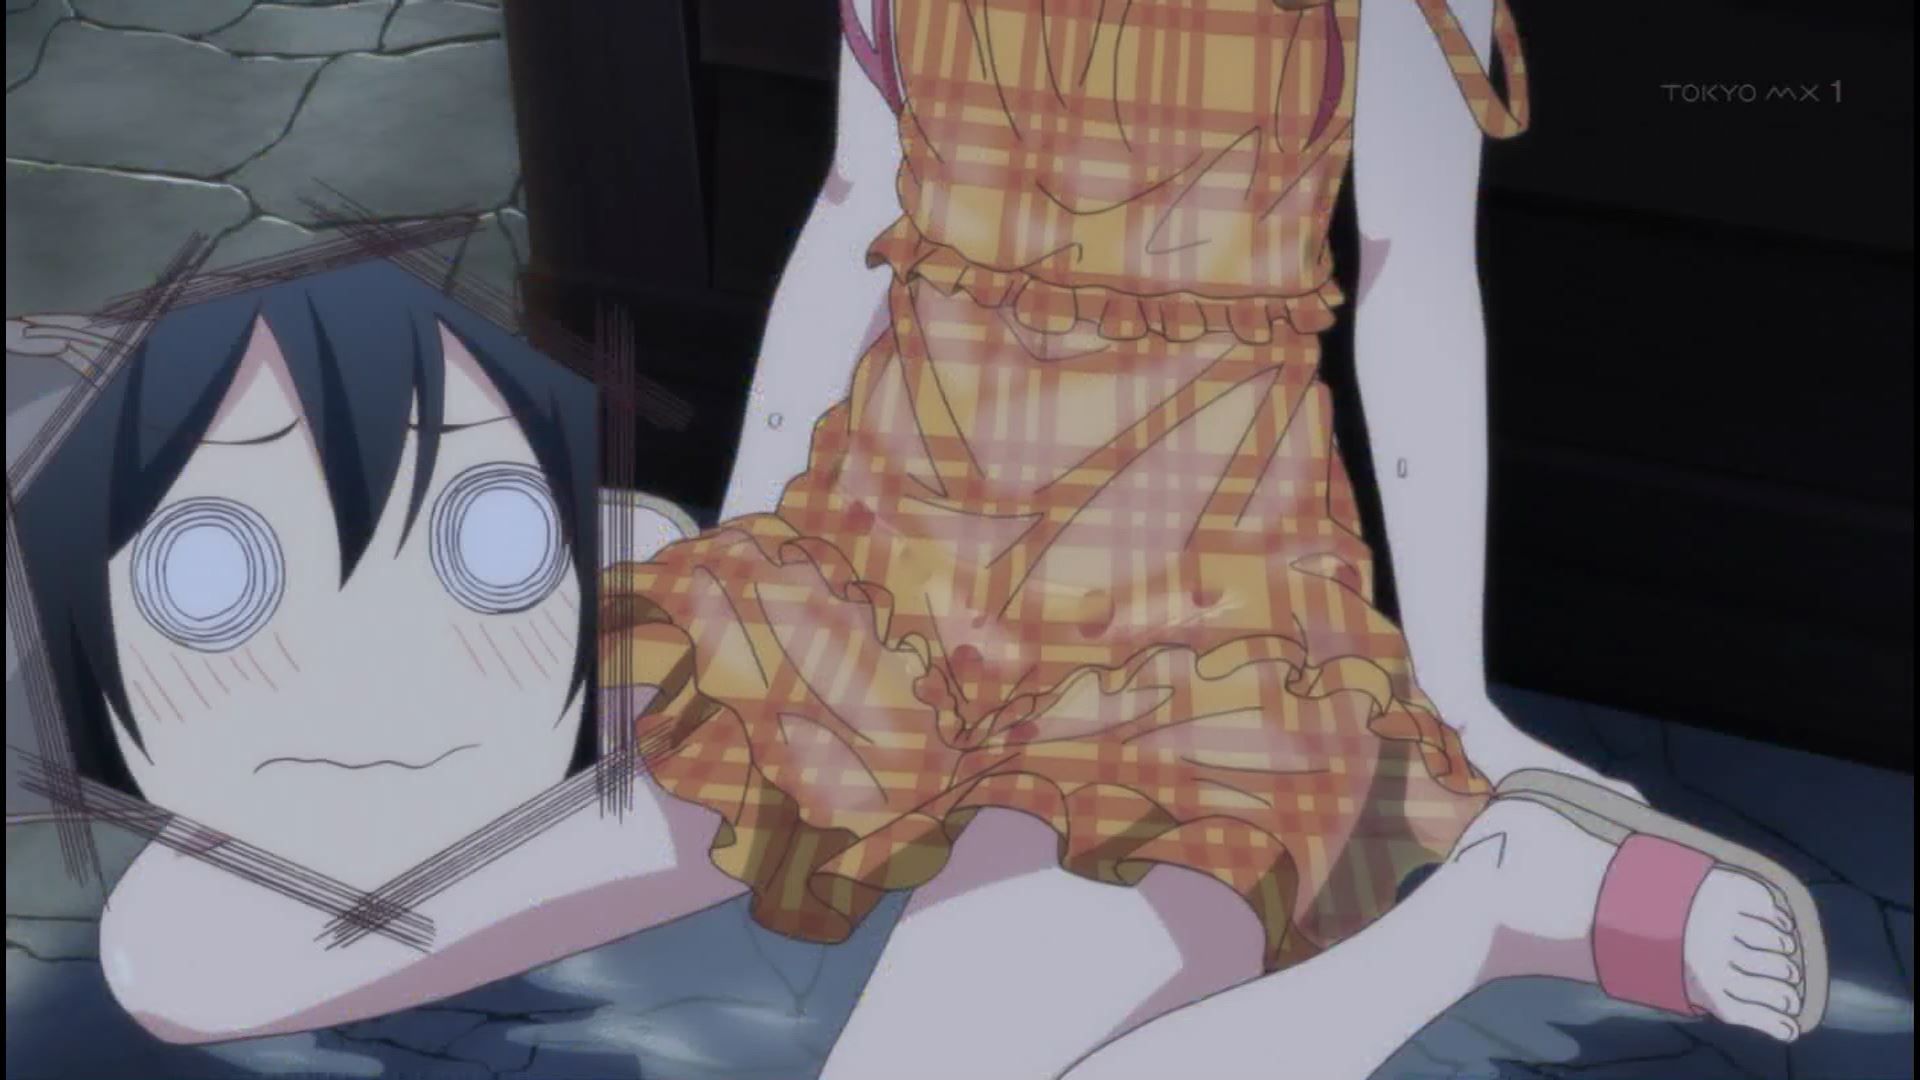 Anime [Tachibana kan to lie] 7 story girl's clothes curling in underwear in plain view to milk 6